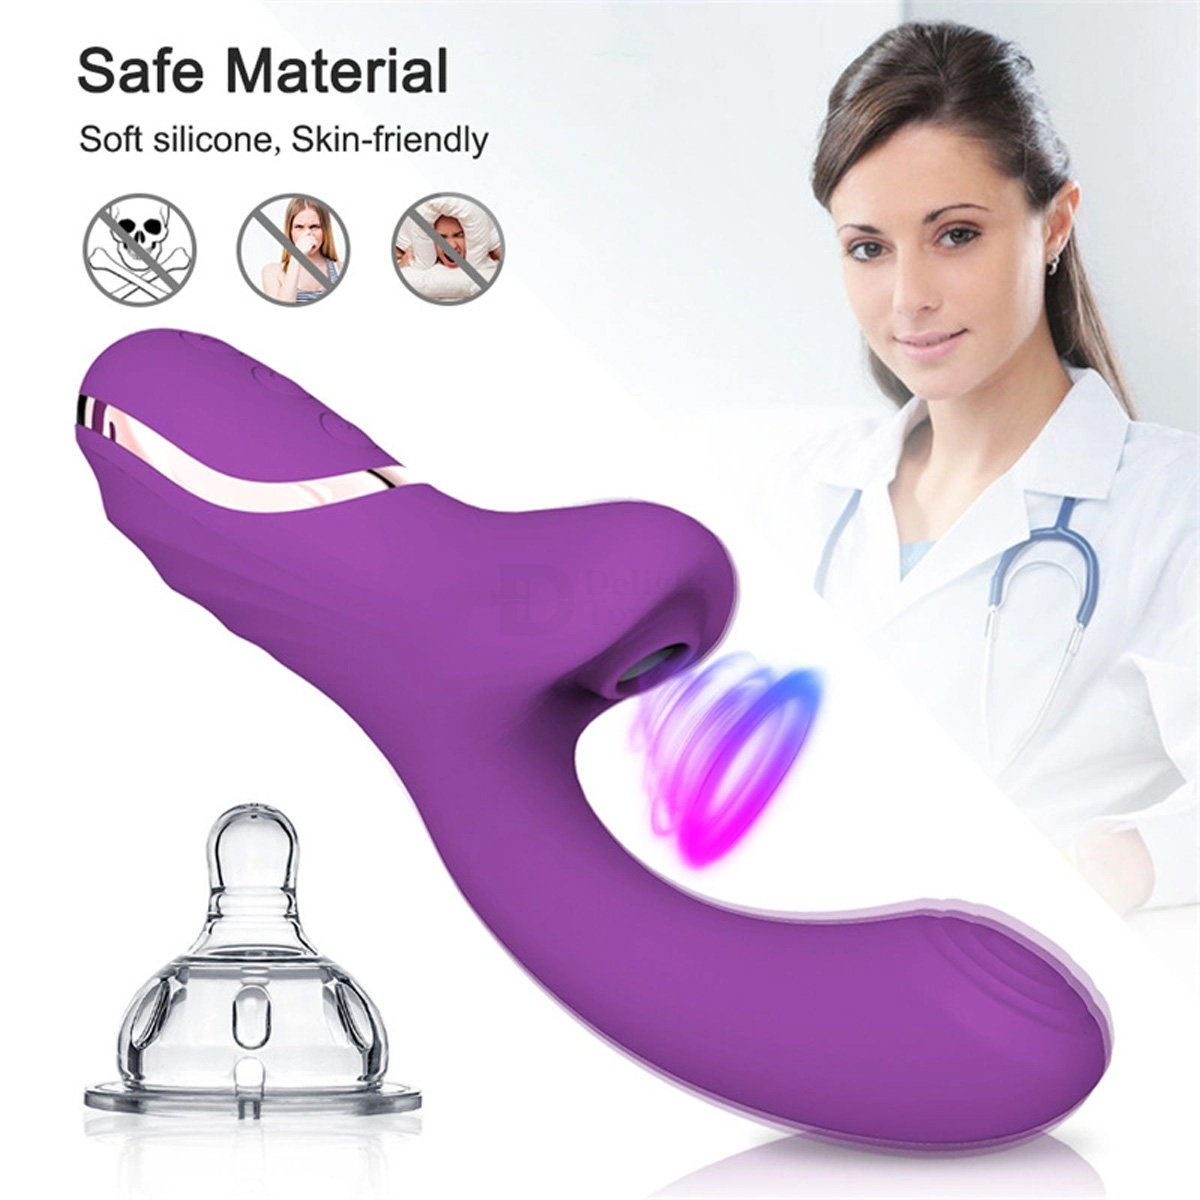 Body safe material g-spot clitoral sucking vibrator sex toy for women